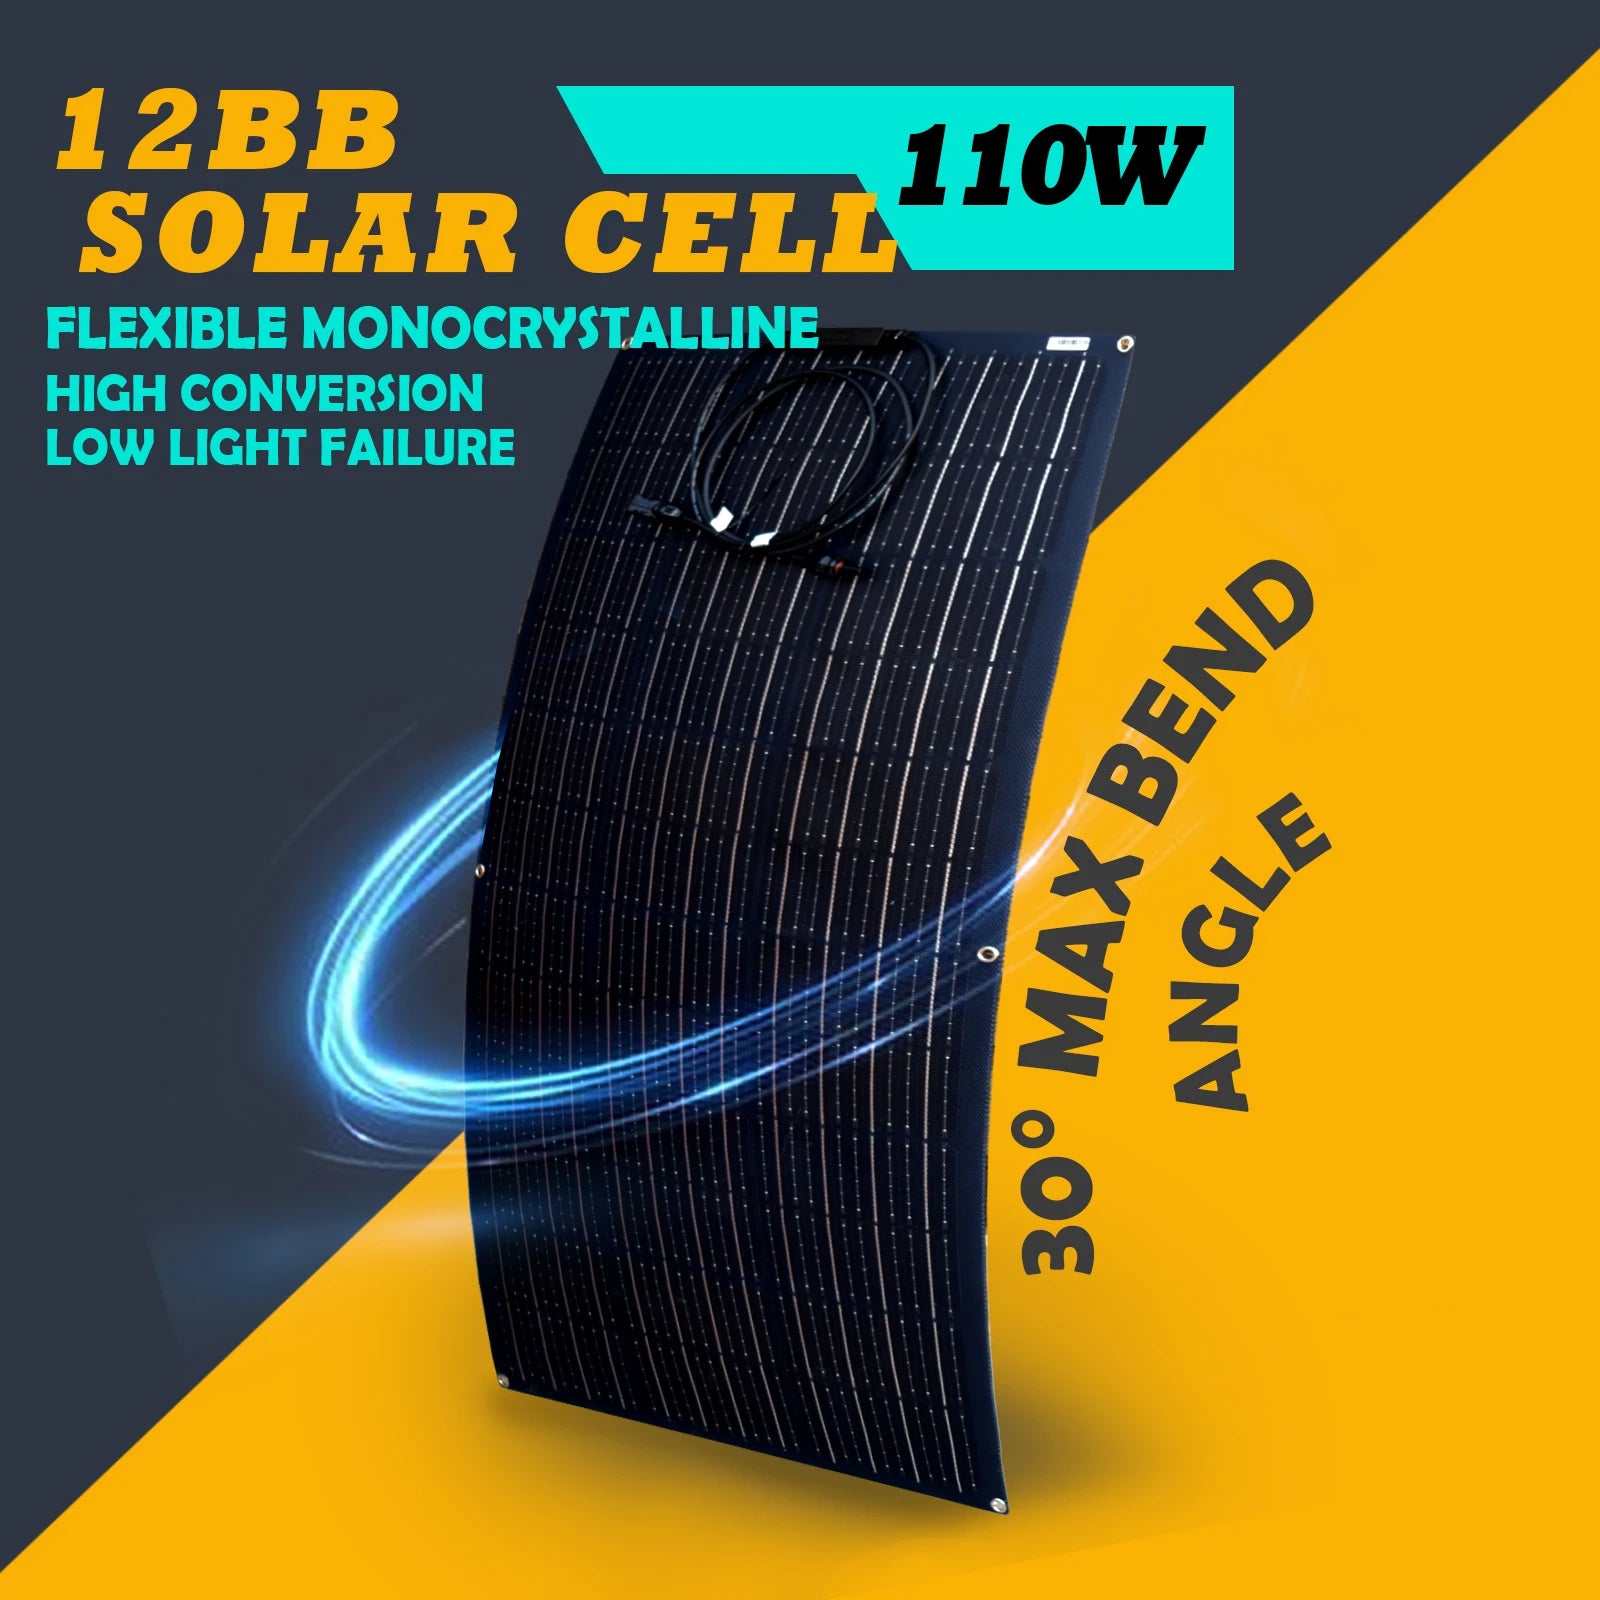 Flexible, high-efficiency solar cell for RVs and boats with high conversion rate and low light failure rate.